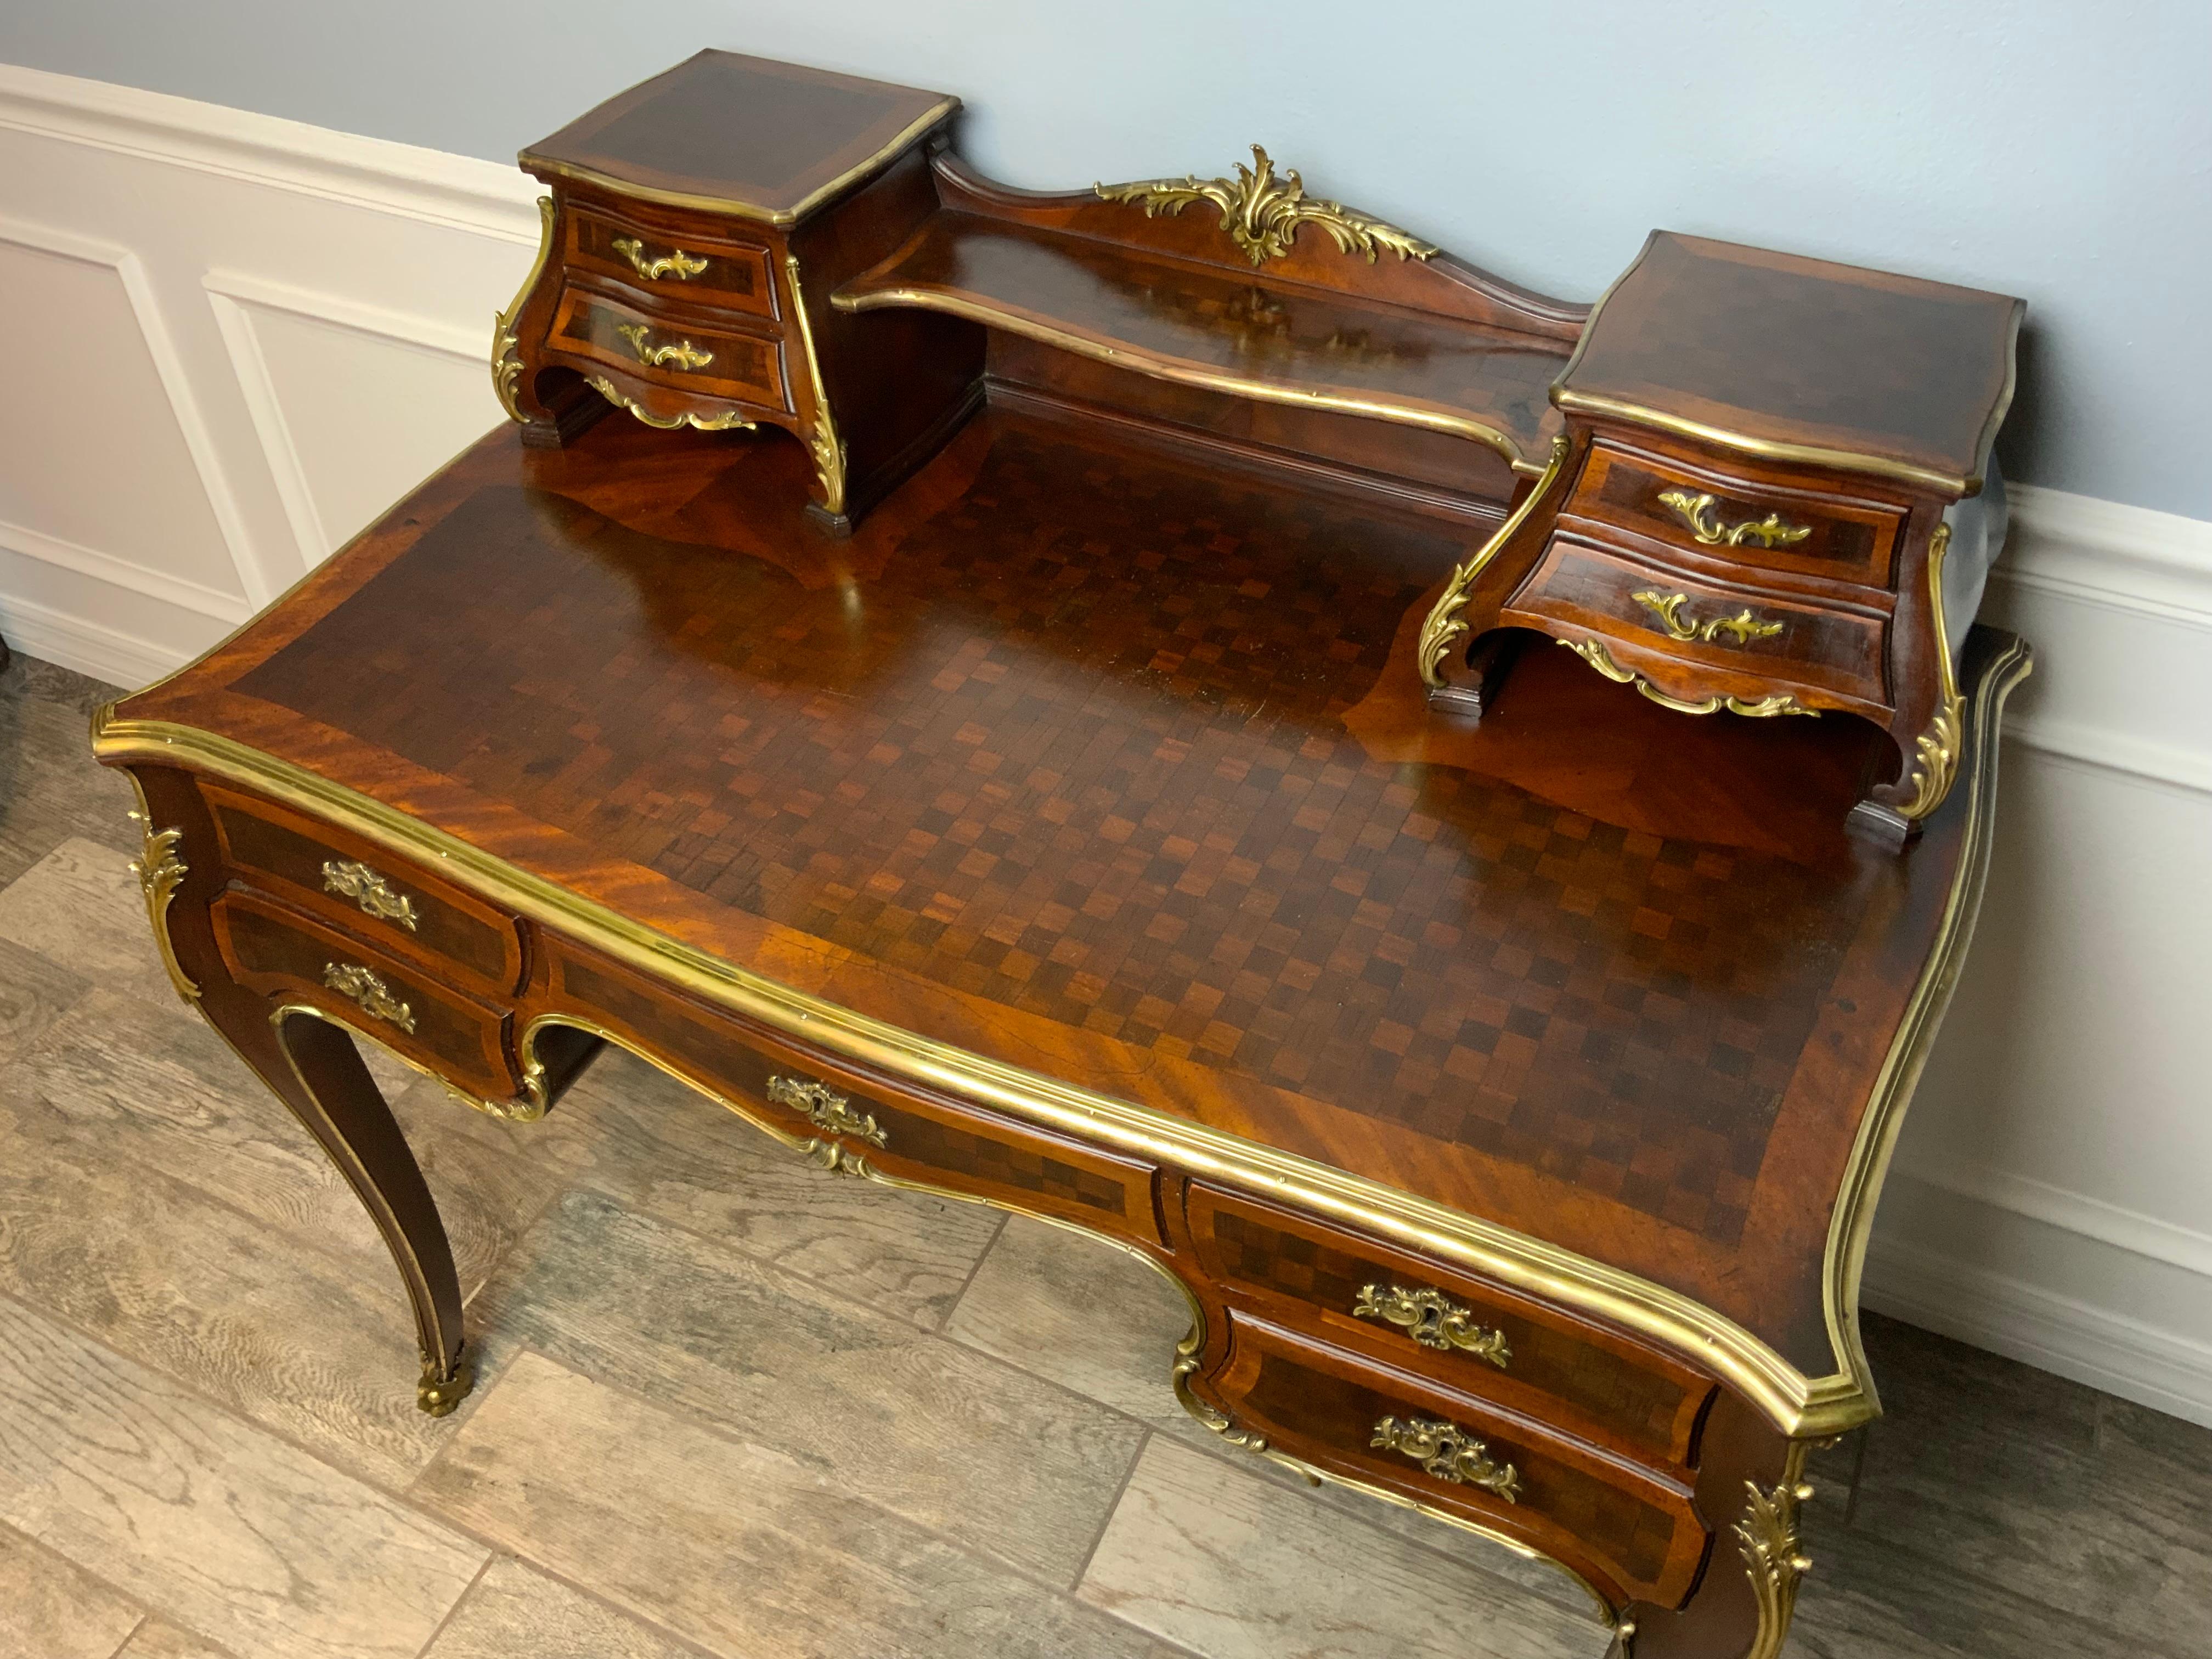 A beautifully proportioned serpentine shaped Louis XV1 style parquetry desk by R. J. Horner with heavy Brass trim and bulbous shaped sides.  This pieces is showing the early type makers label from New York, N.Y.  R.J. Horner did also import some